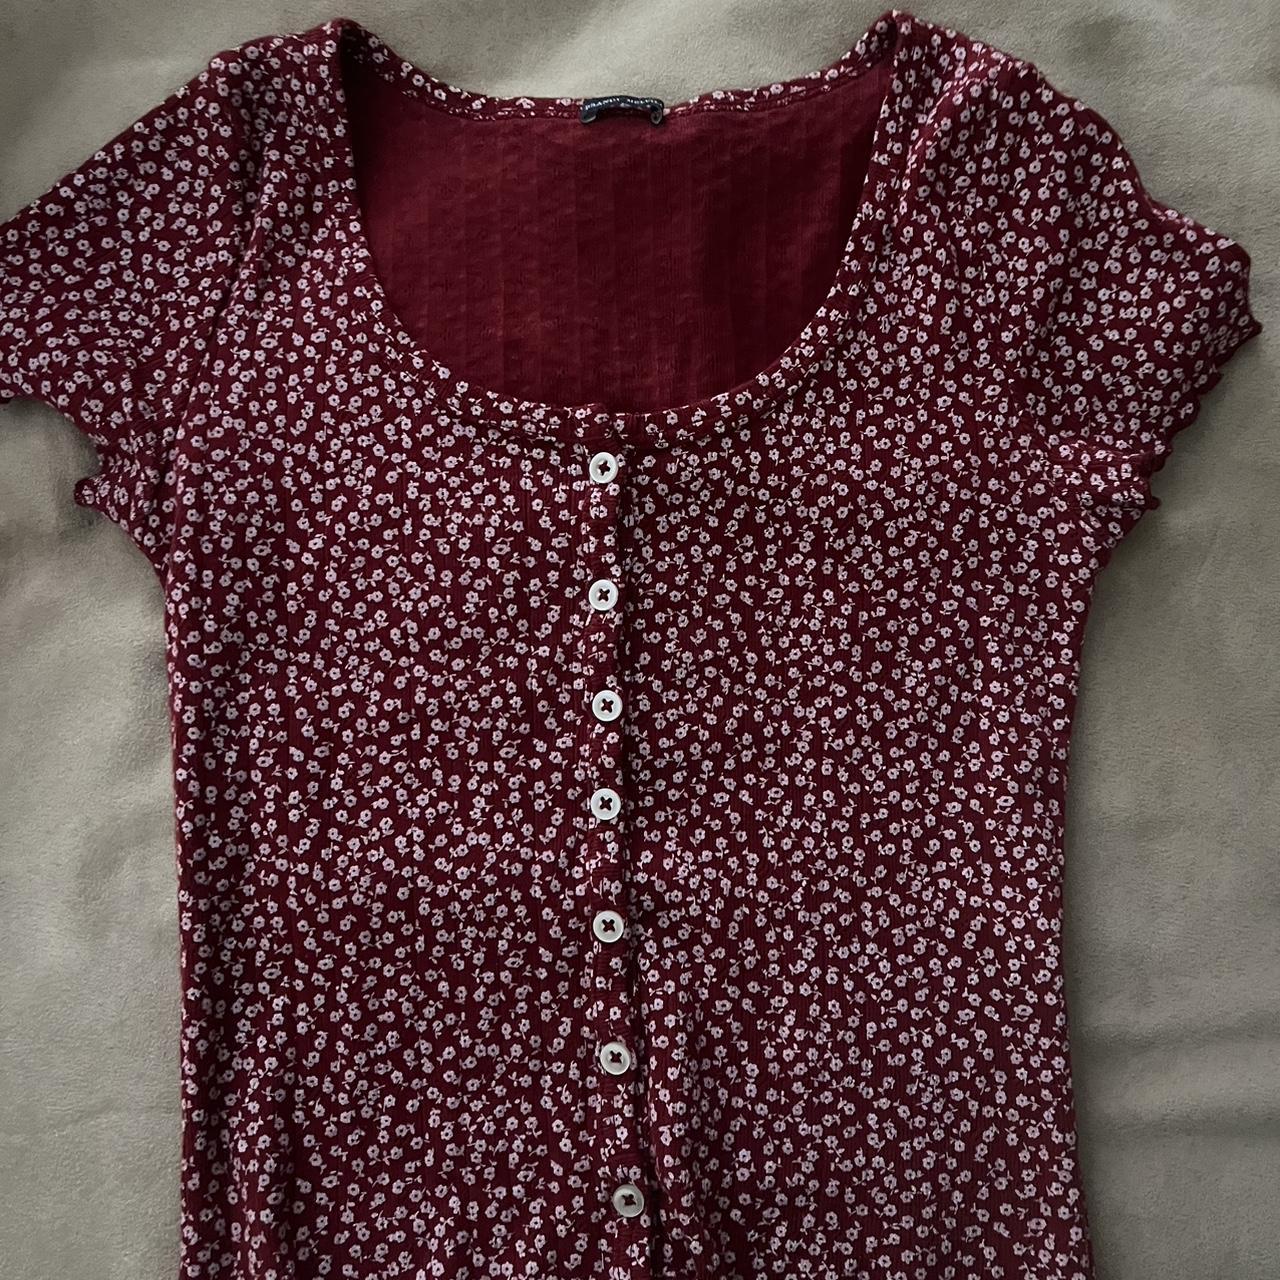 White and red floral top from Brandy Melville